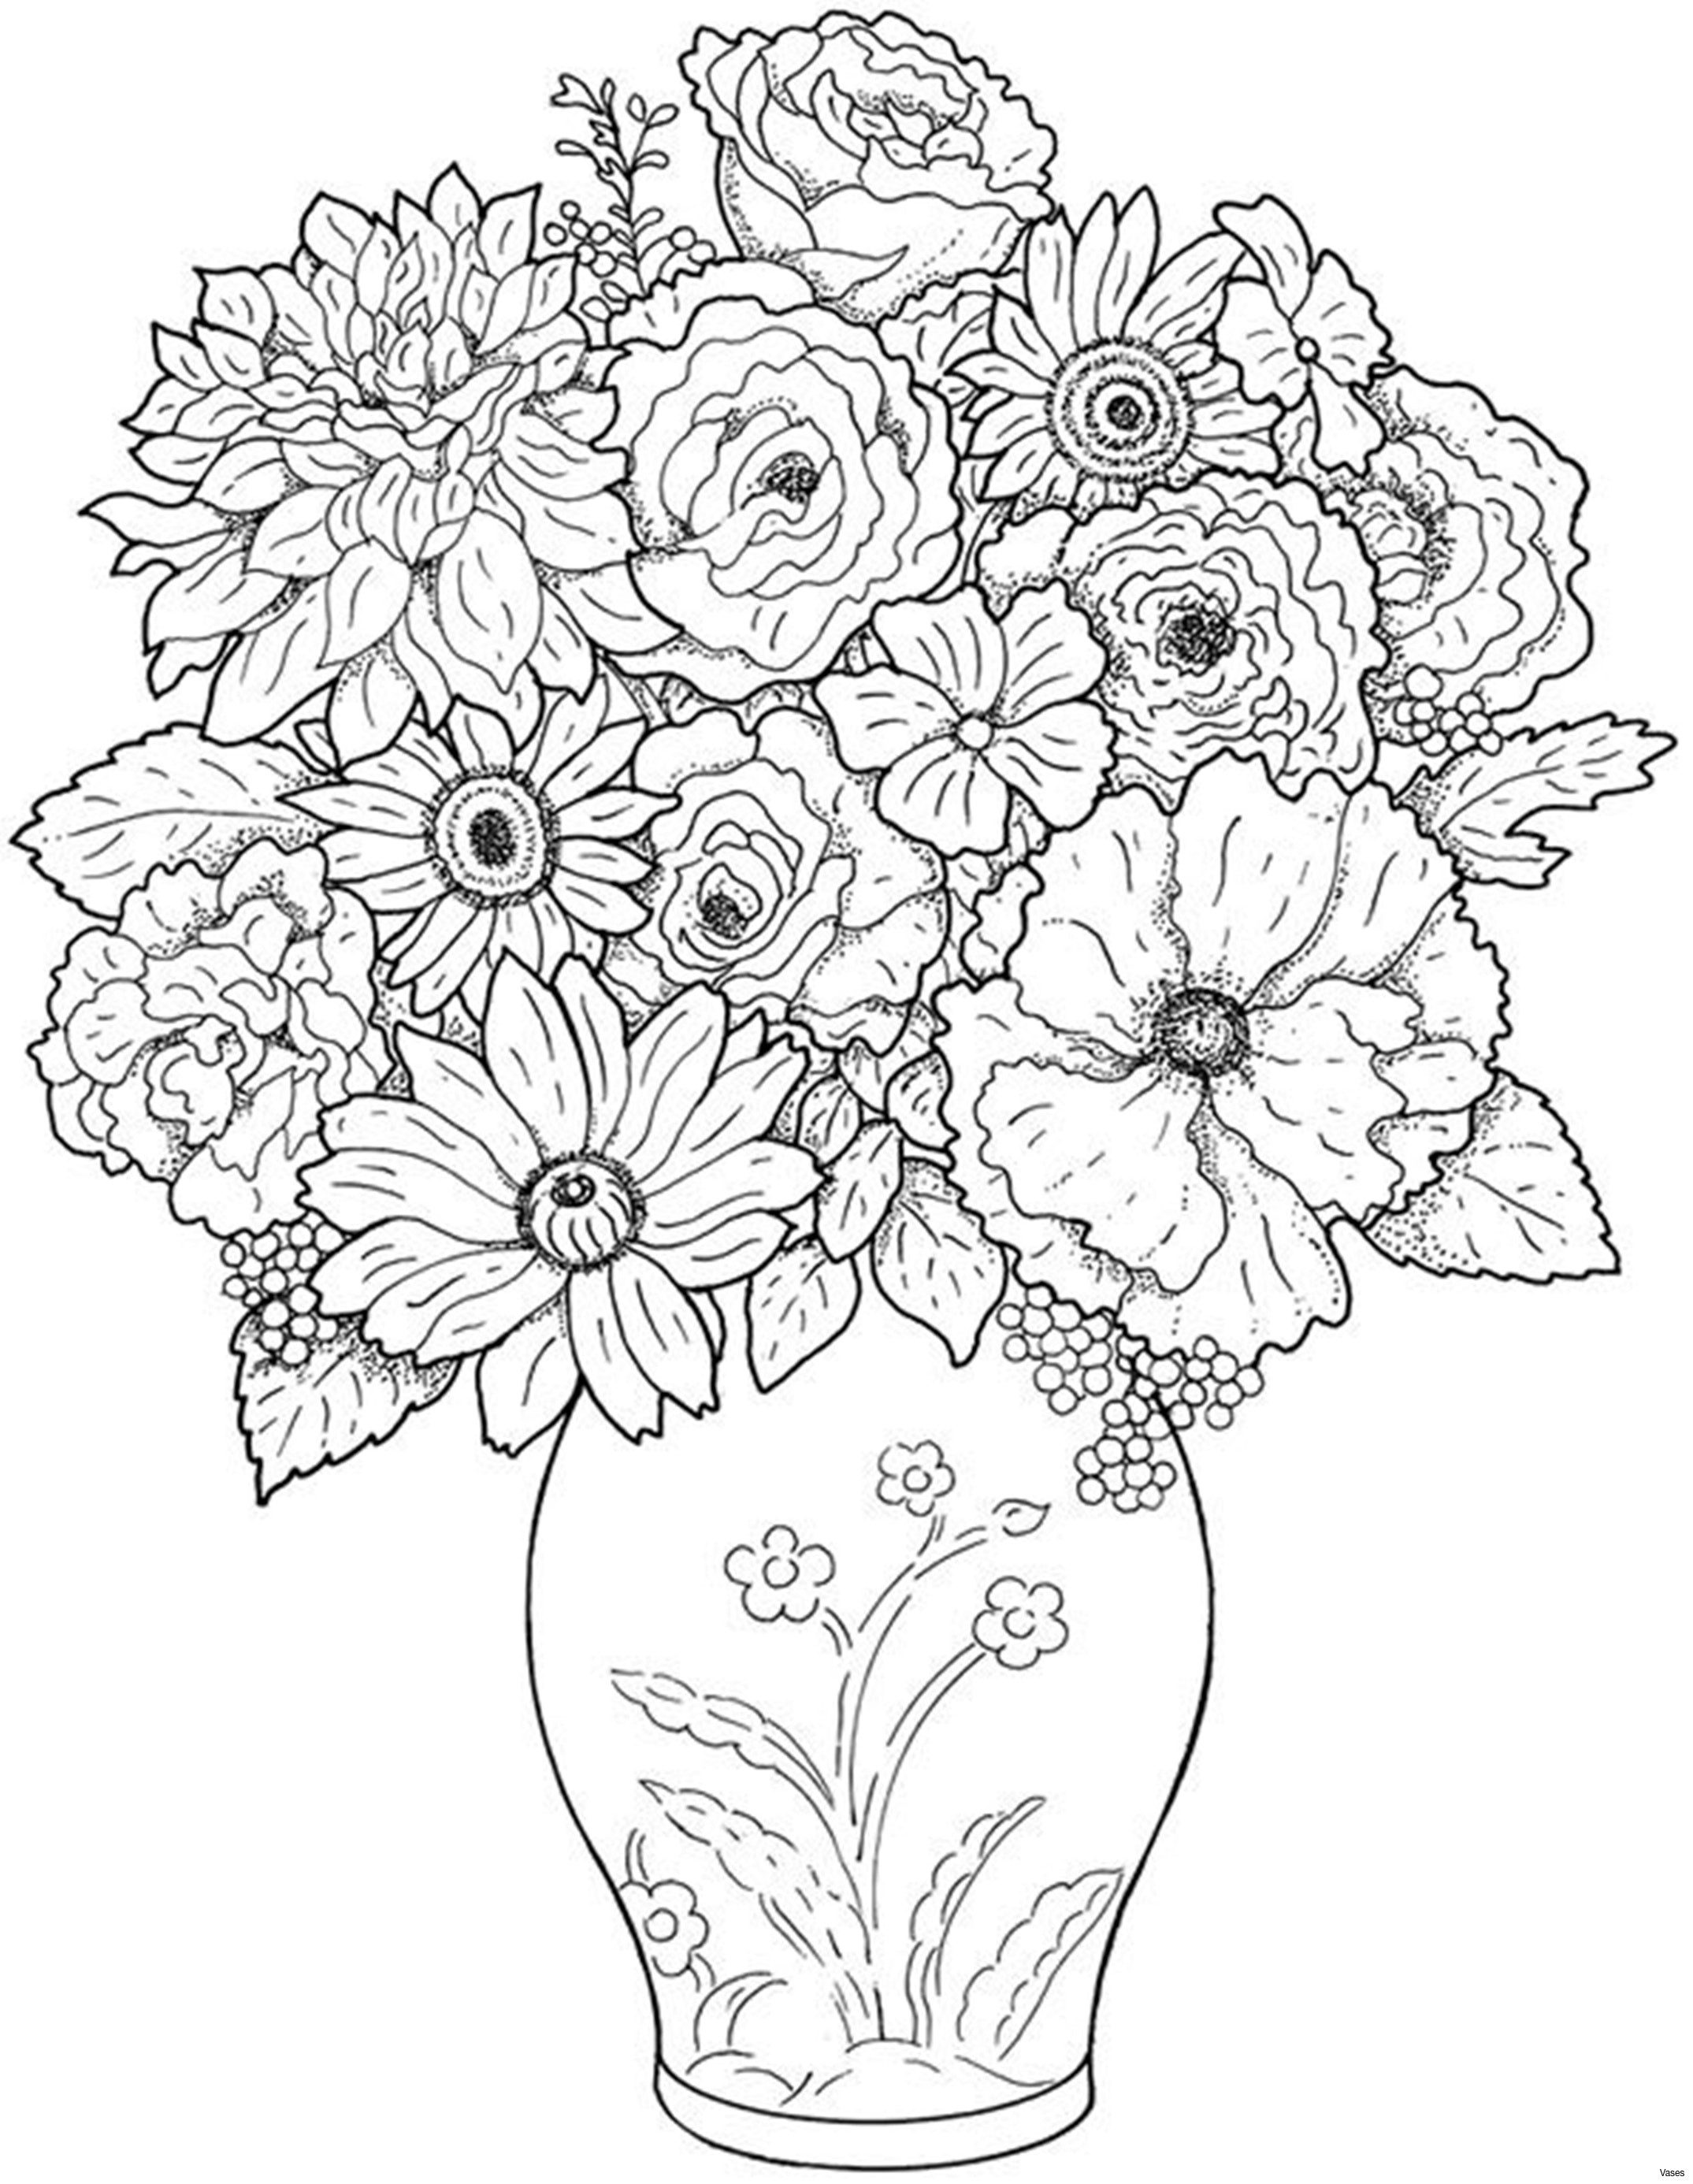 13 Stunning where Can I Buy Cheap Flower Vases 2024 free download where can i buy cheap flower vases of cool vases flower vase coloring page pages flowers in a top i 0d pertaining to awesome collection solutions flower vase coloring page about worksheet of